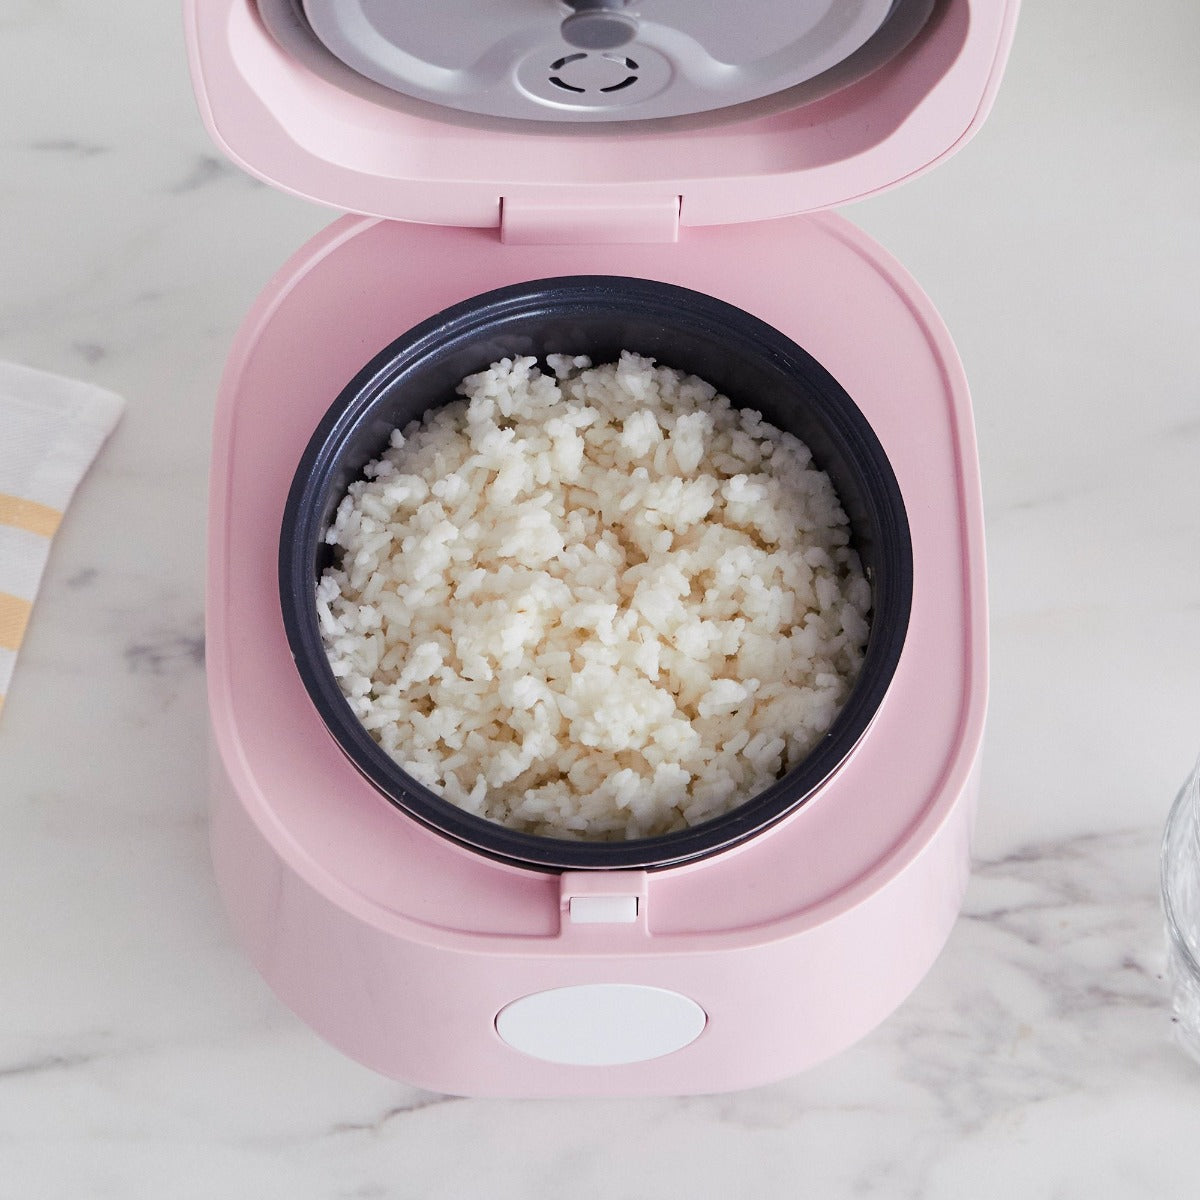 GreenLife Go Grains 4-Cup Pink Electric Grains and Rice Cooker